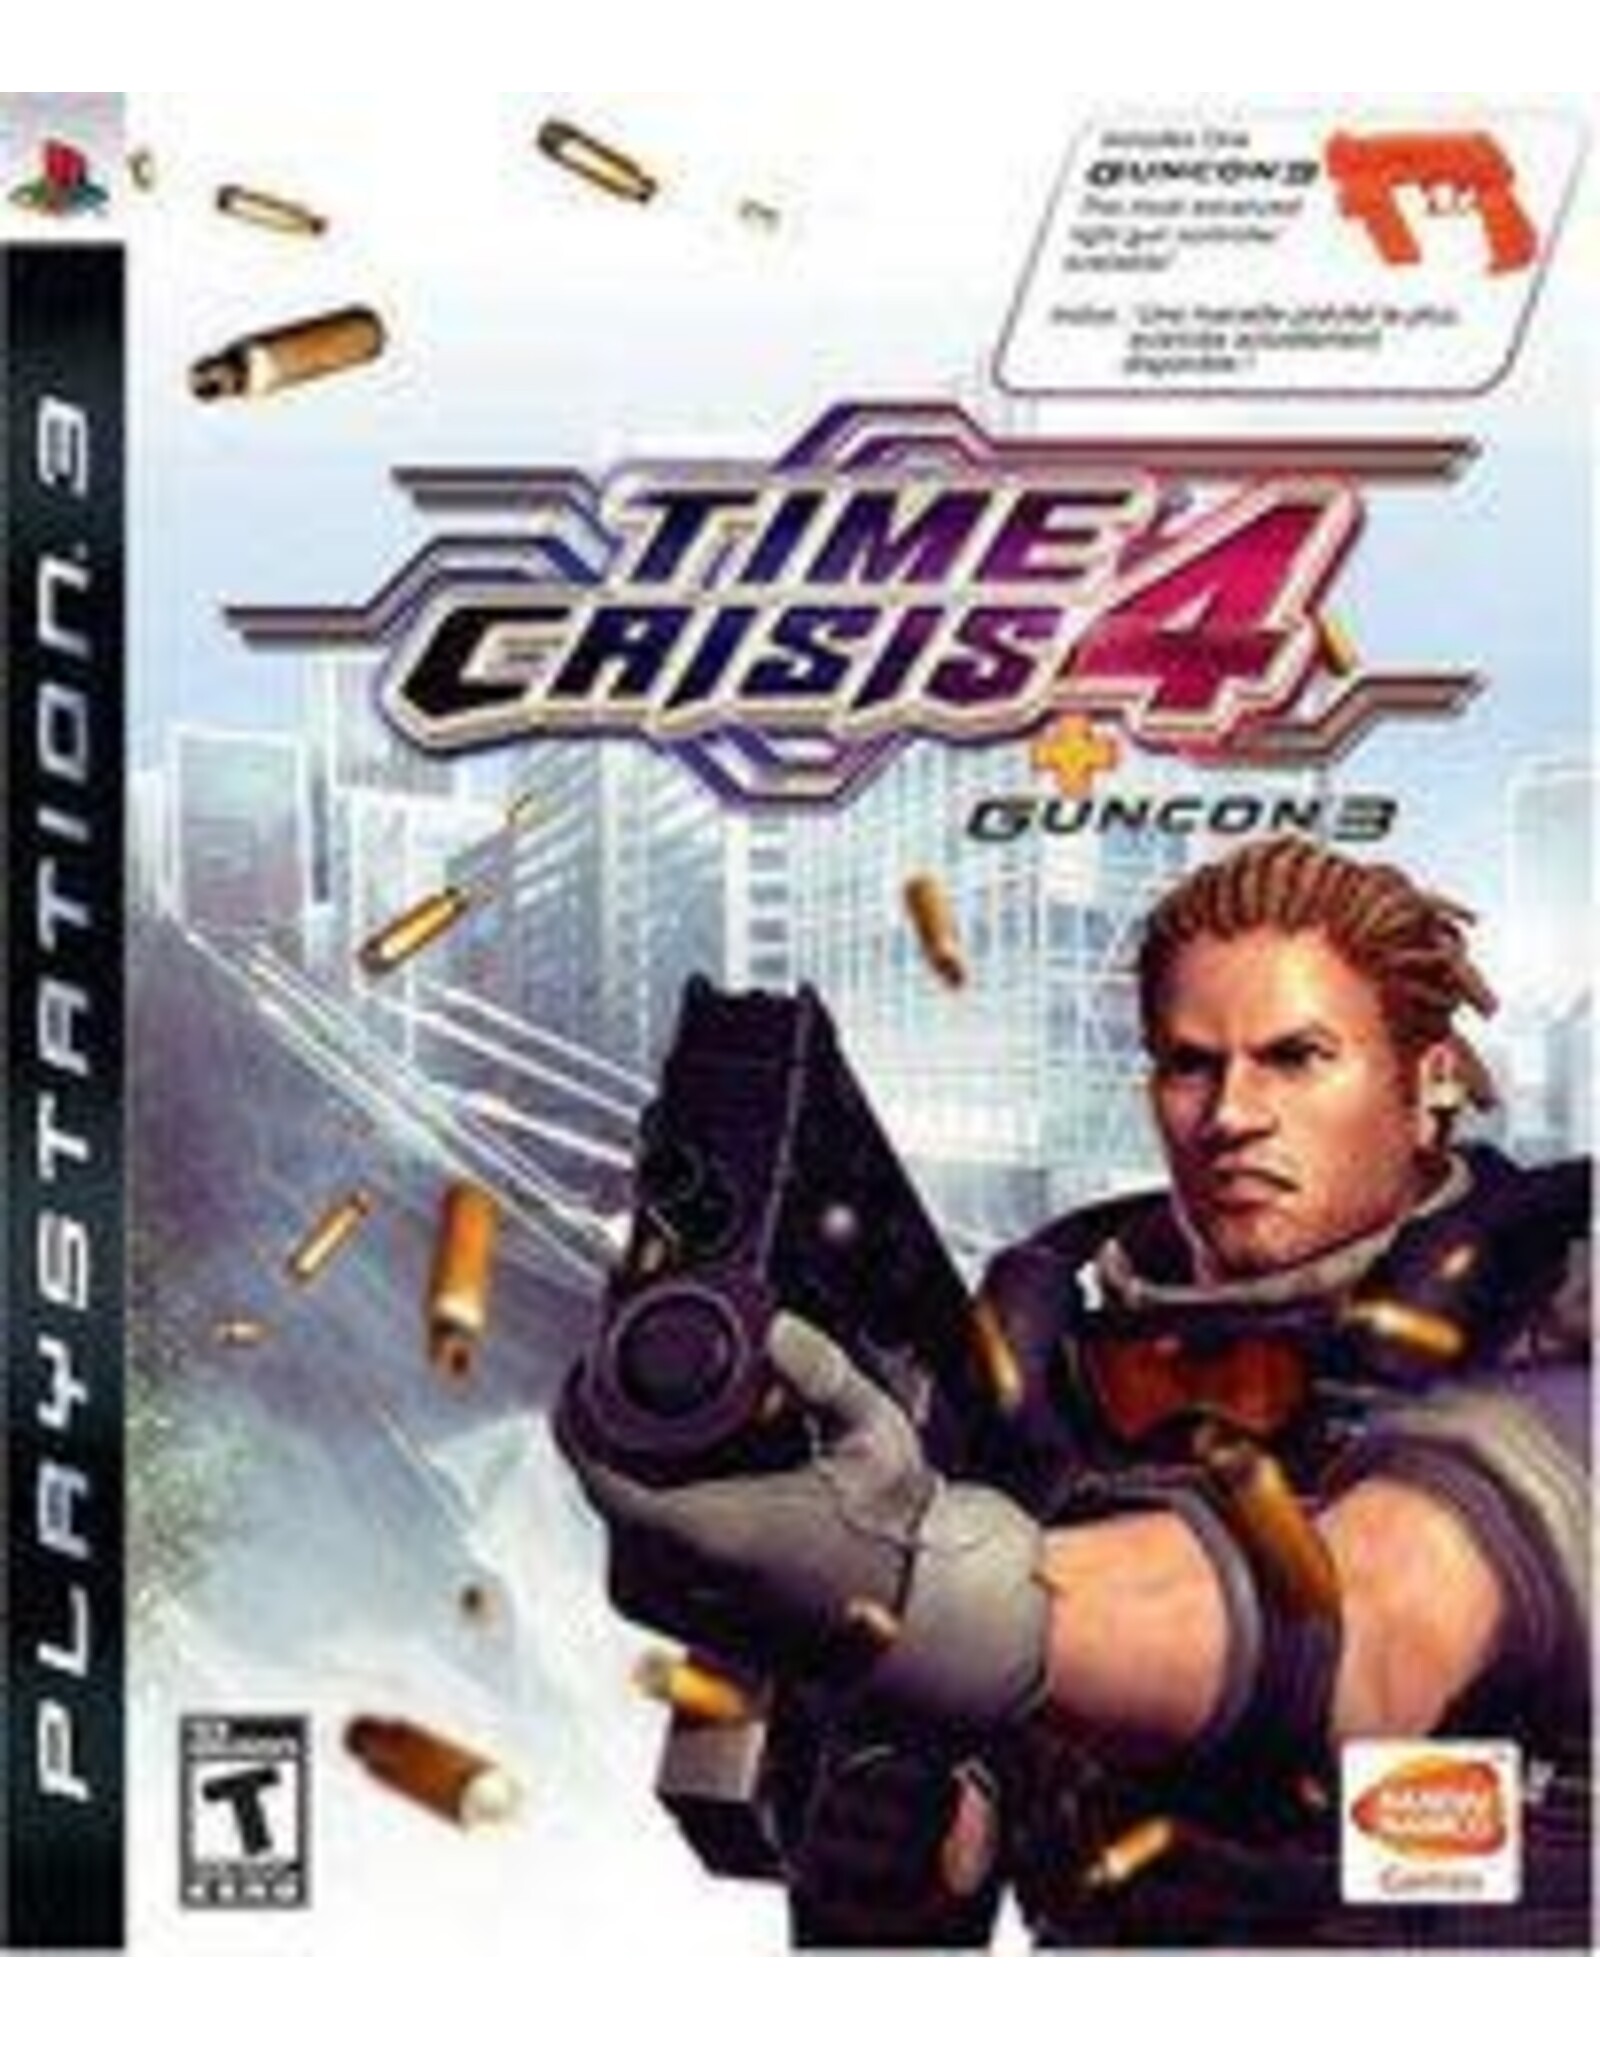 Playstation 3 Time Crisis 4 with Guncon 3 (Game CiB, Guncon Without Box, Sensors Missing Weight Straps)